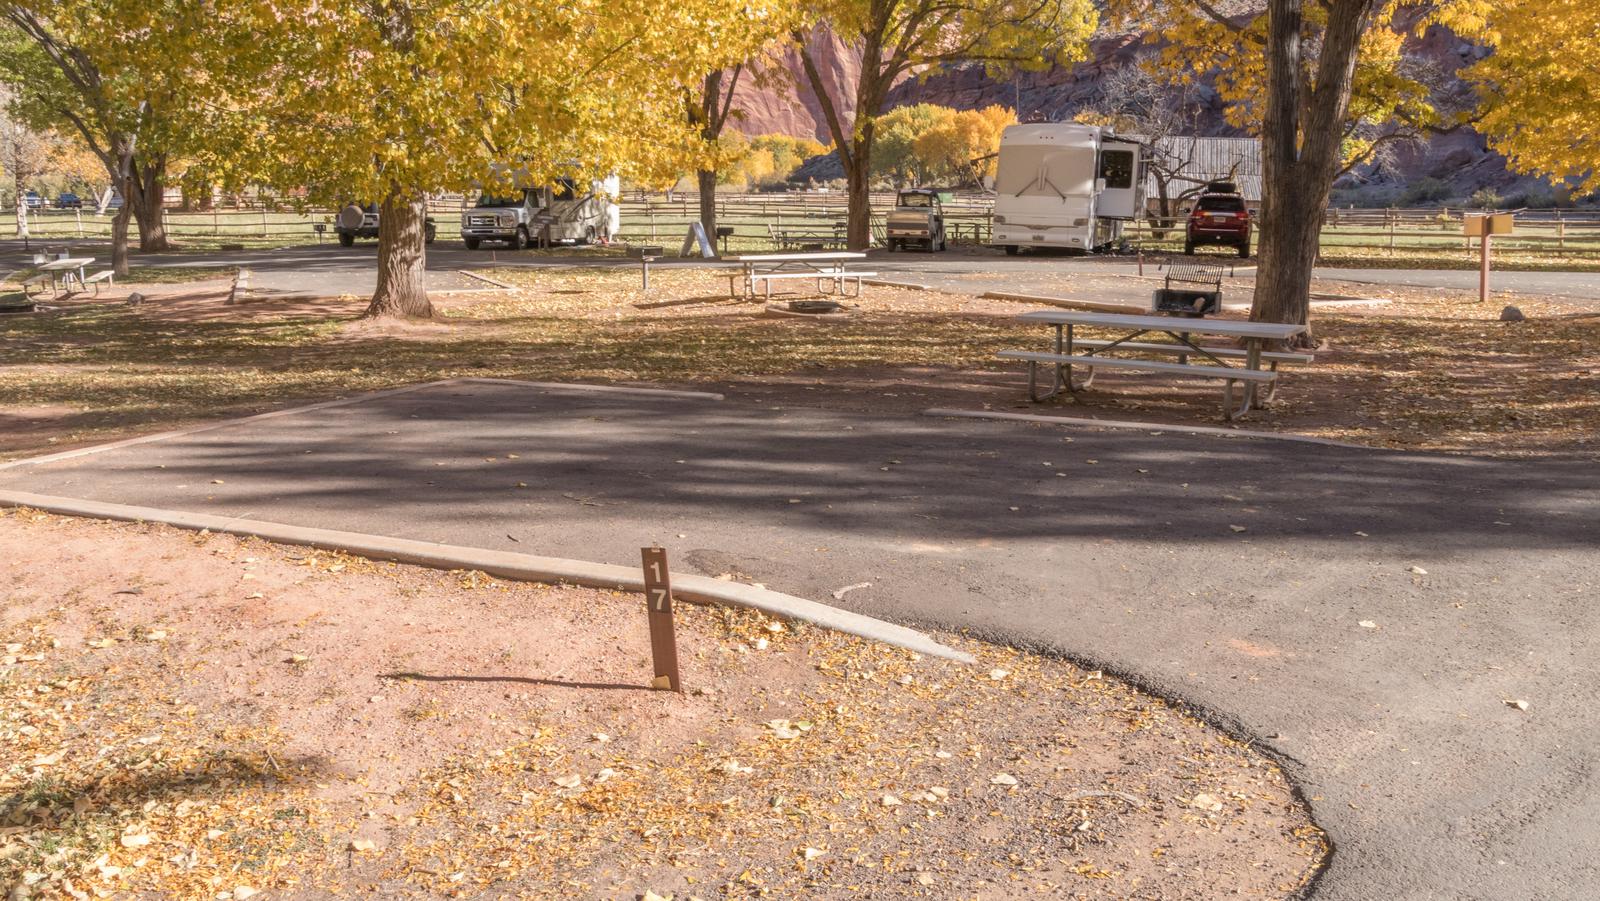 A paved driveway. Facing the end of the driveway, a picnic table is off to the right. There are trees and a barn in the background.Site 17, Loop A in fall.
Paved dimensions: 14' x 29'